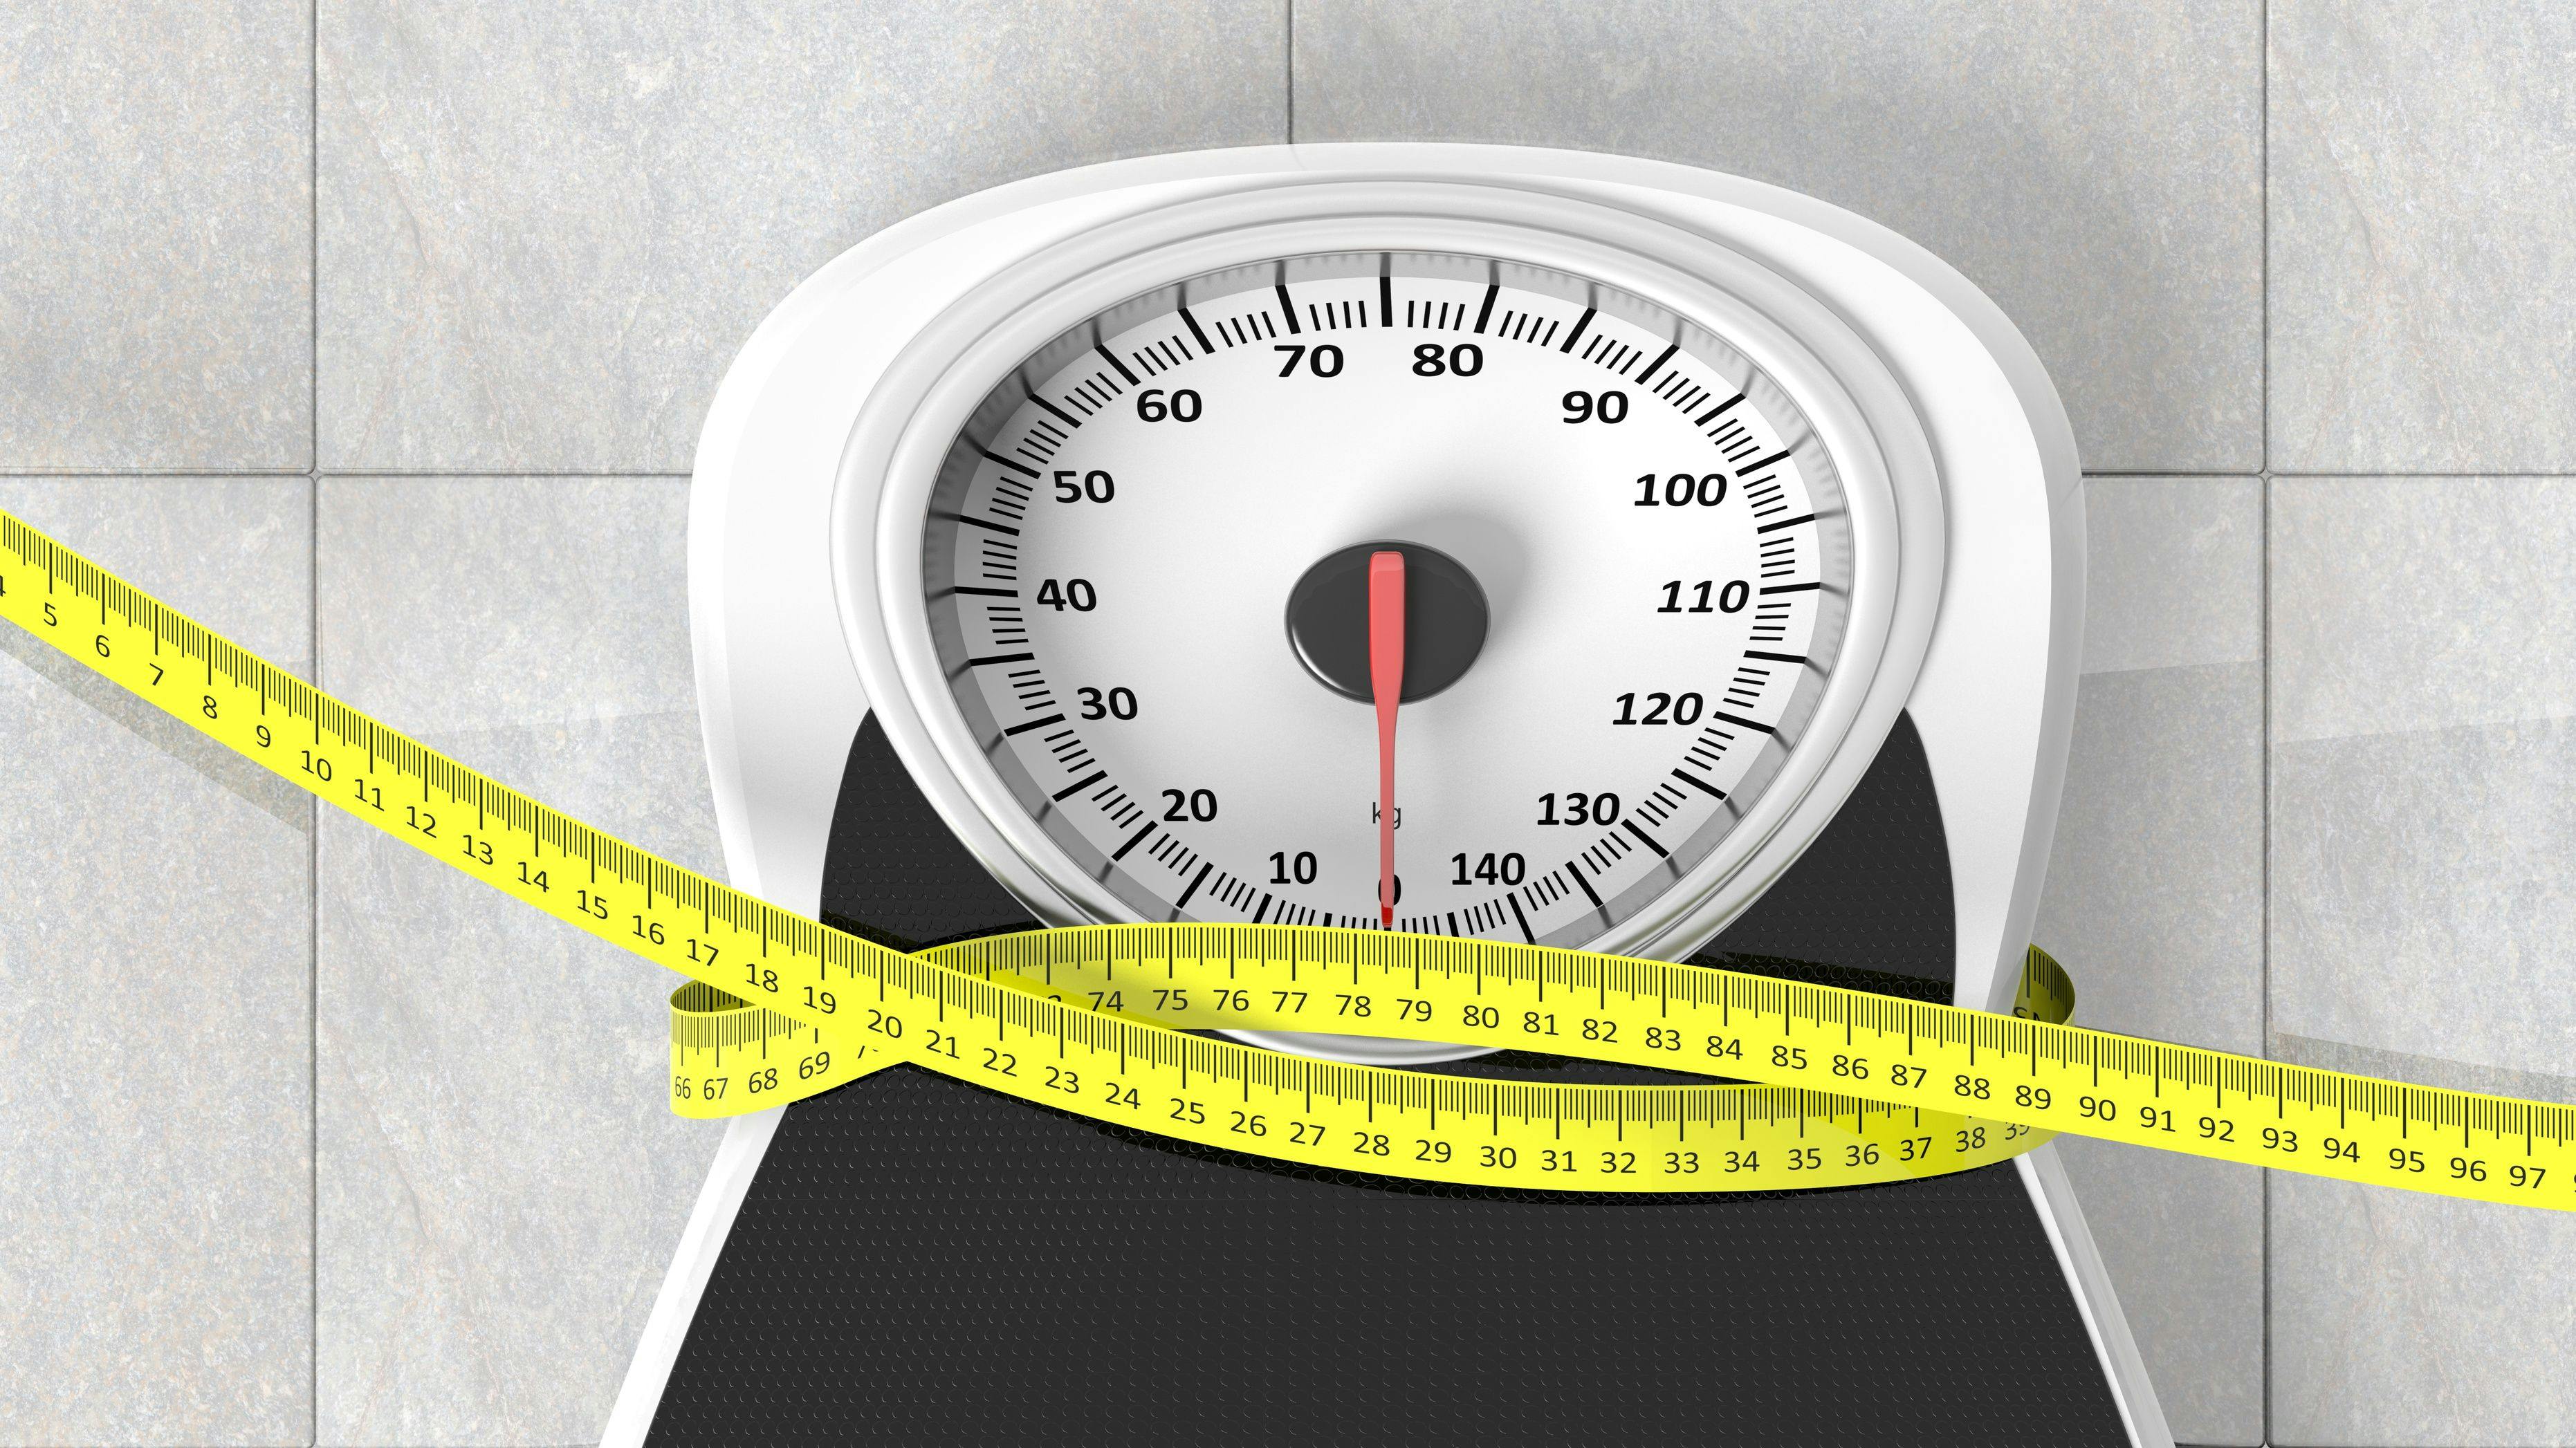 Return to Healthy Weight Could Reverse Cardiovascular Risk in Obesity